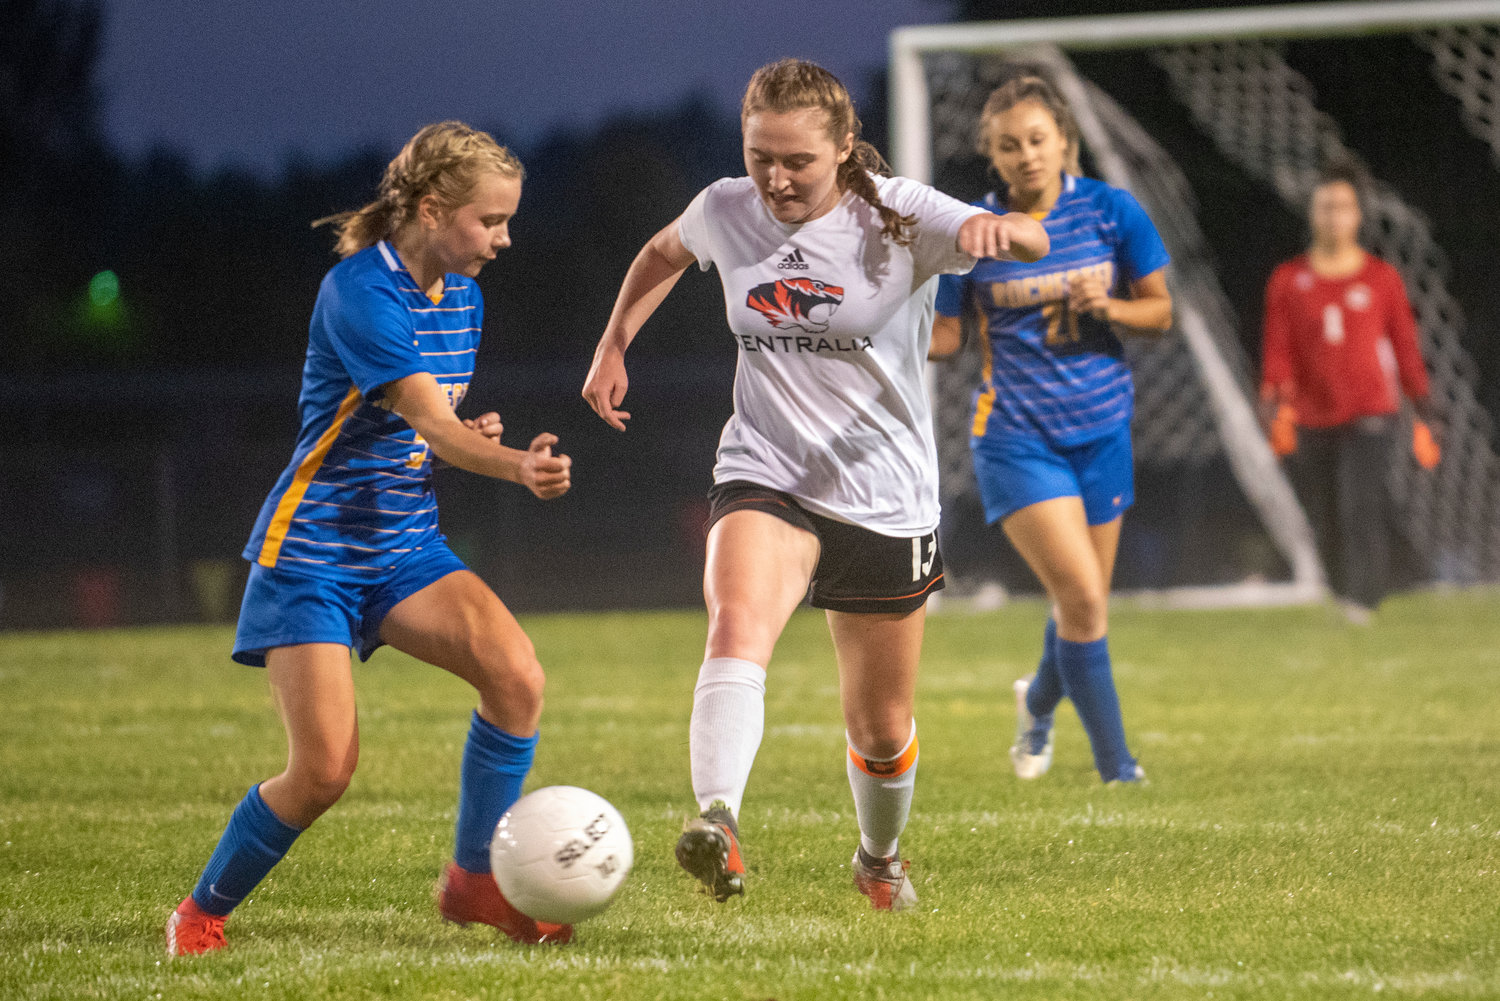 Centralia's Sarah Robbins (13) dribbles against Rochester's Piper Quarnstrom(5) in a match on Thursday in Rochester.